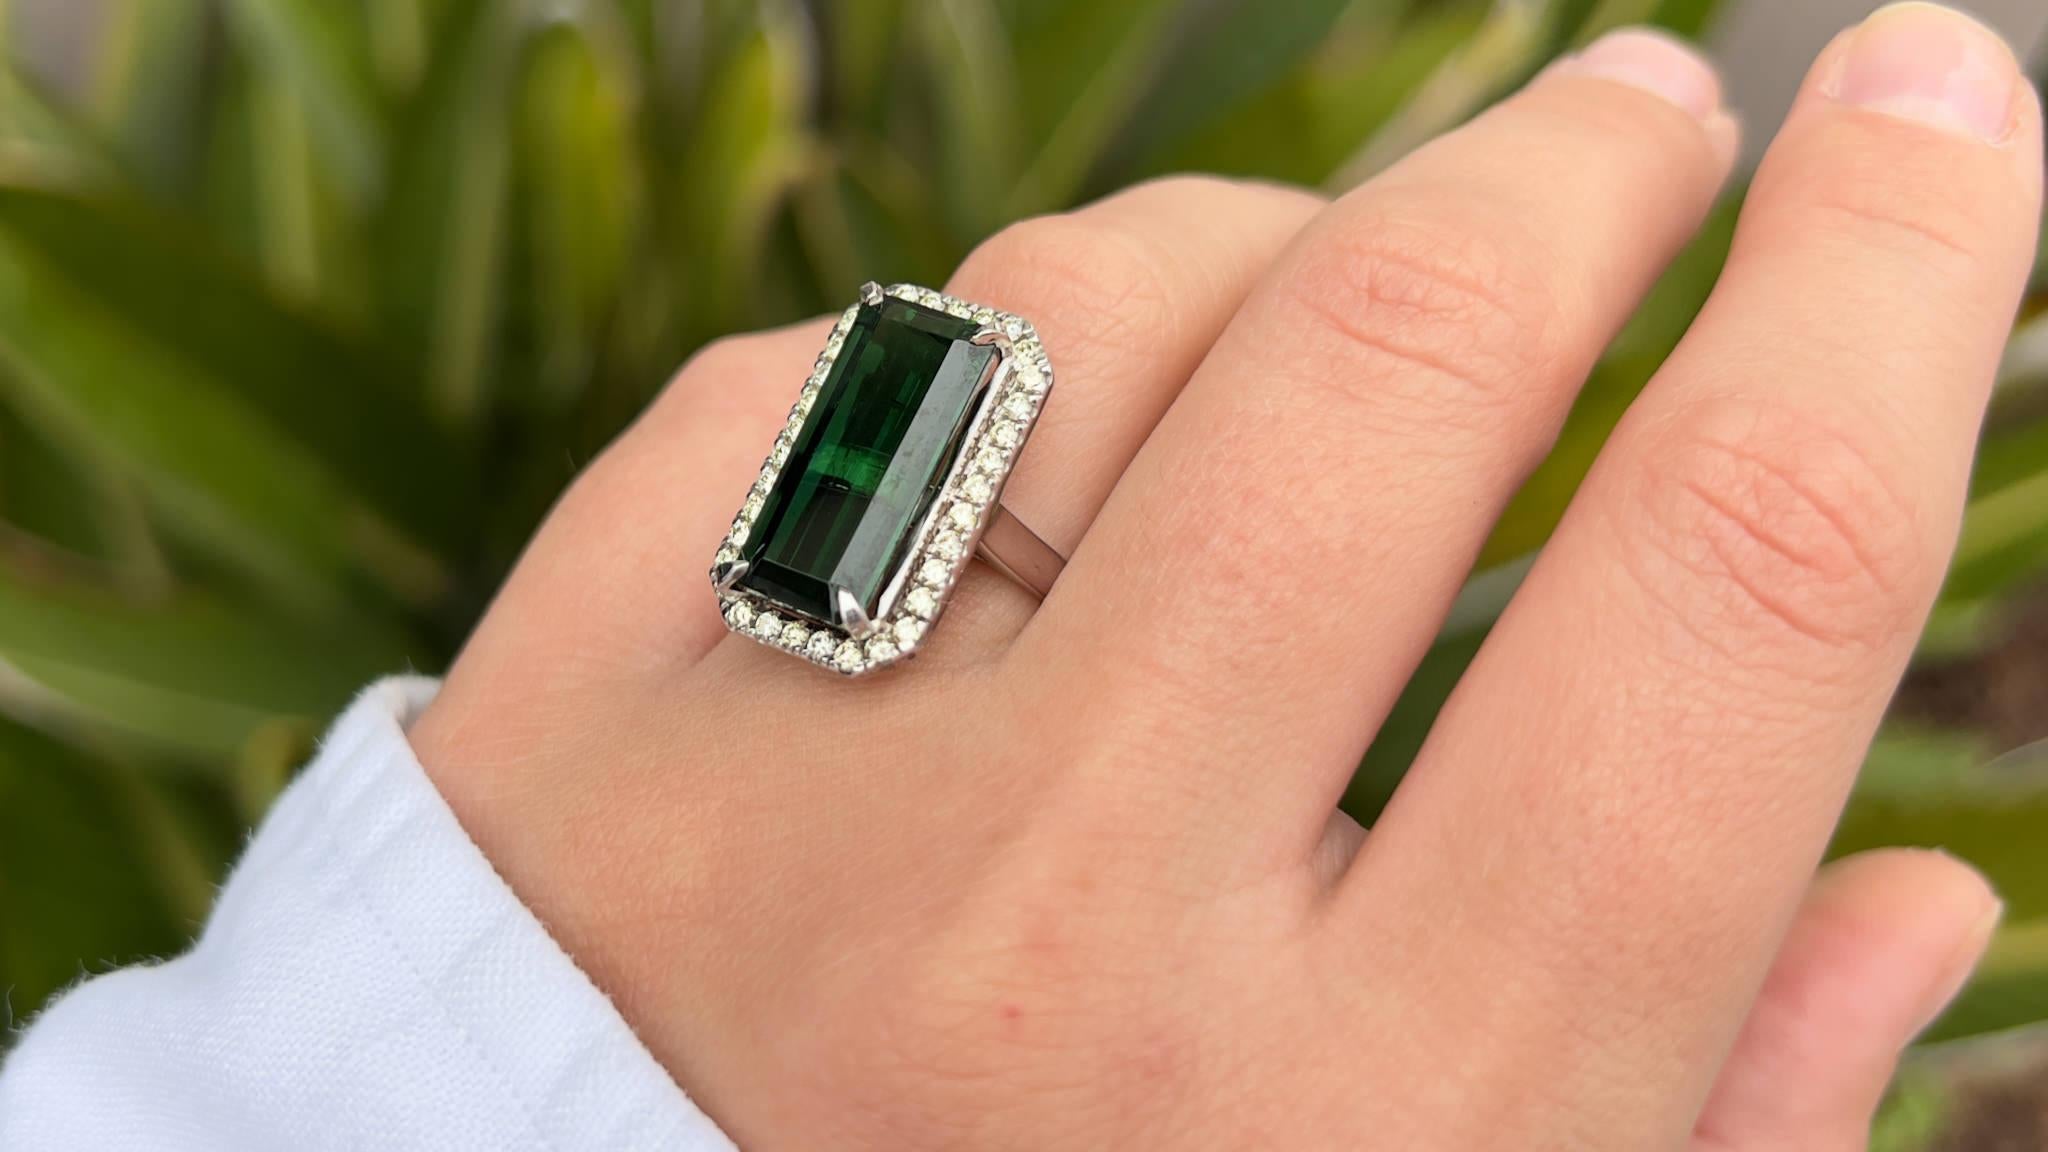 Green Tourmaline 8 Carat Ring with Diamonds 18k Gold In Excellent Condition For Sale In Carlsbad, CA